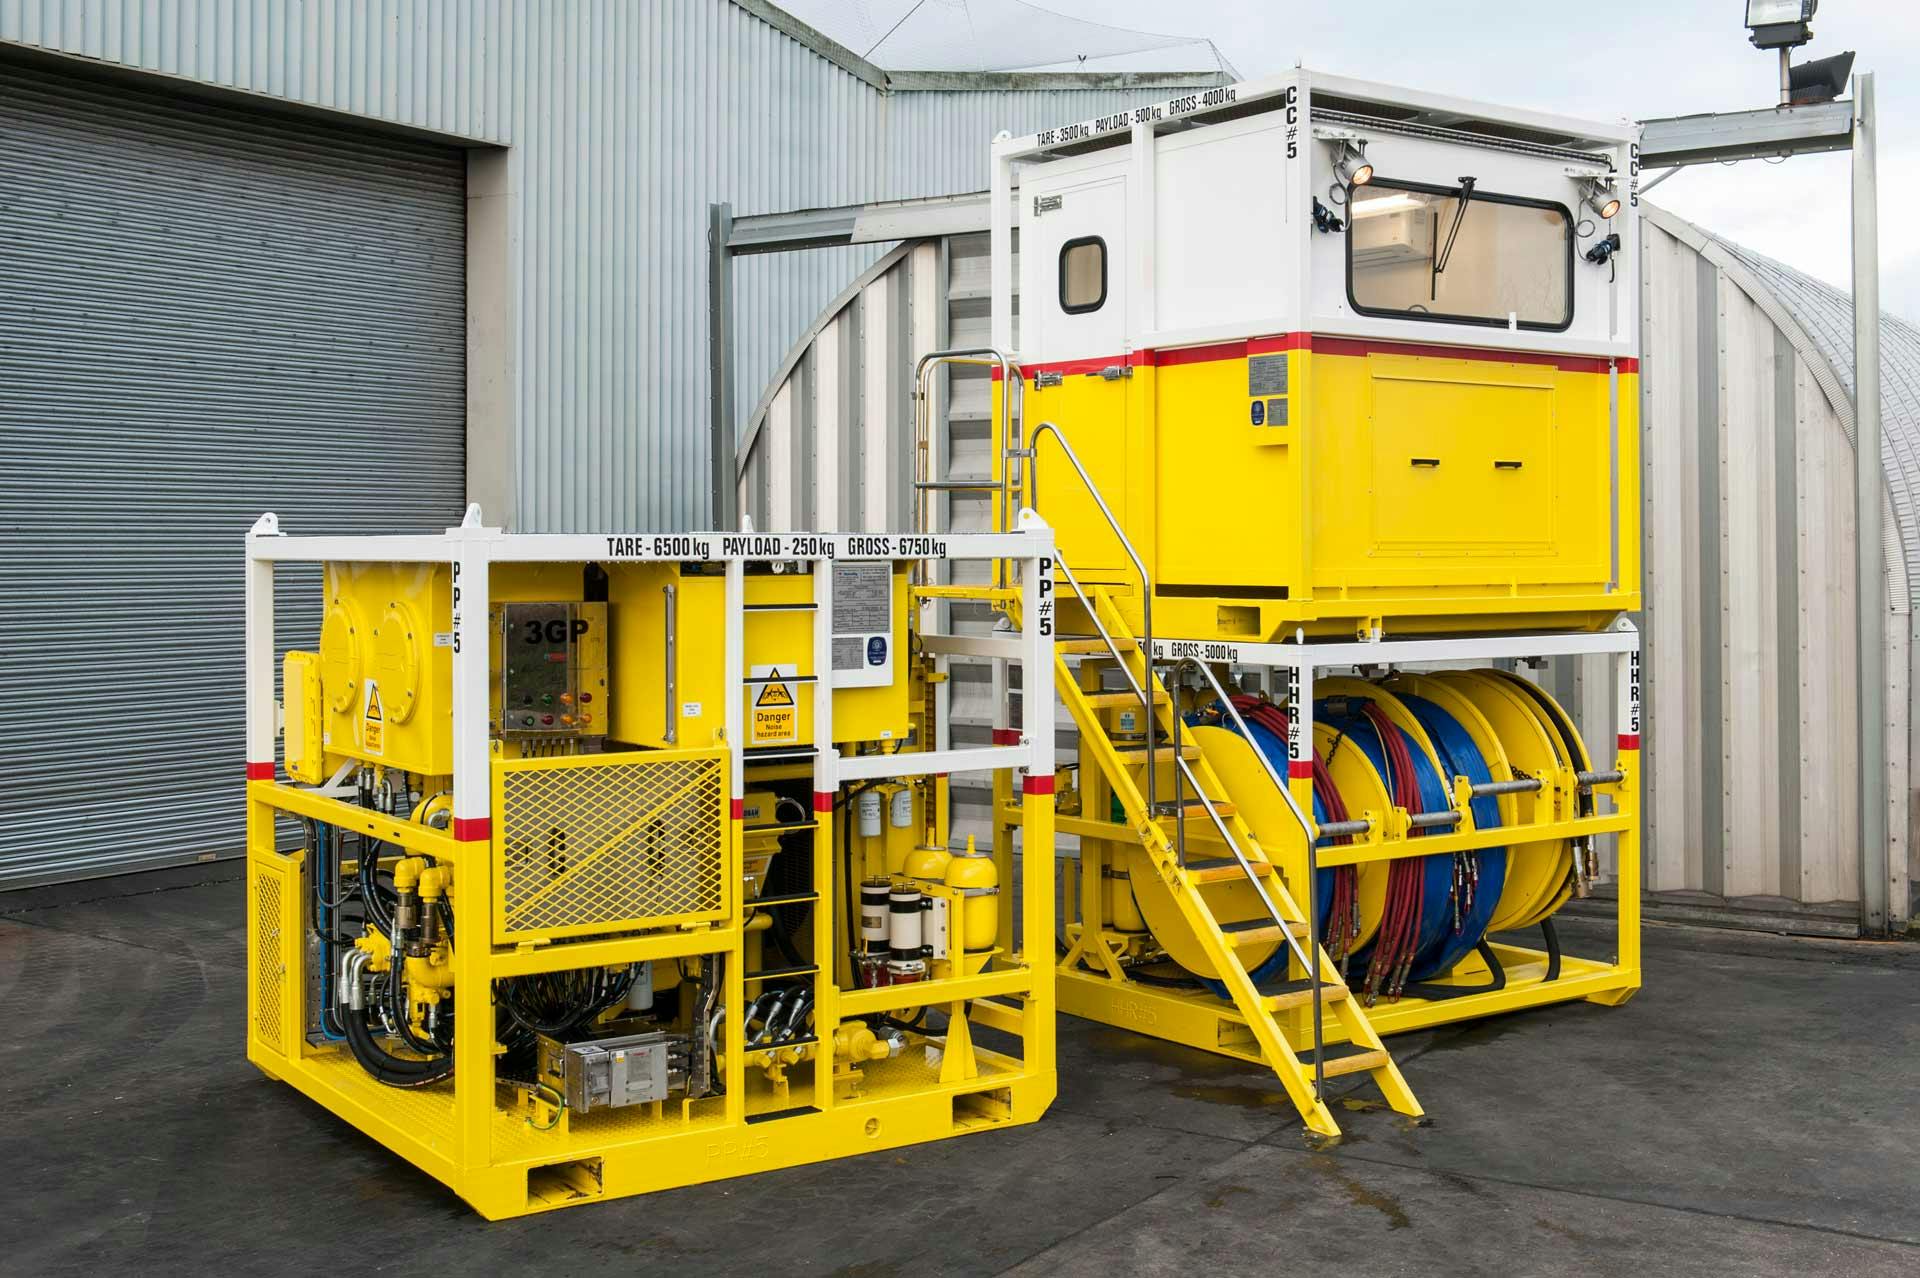 Skid-mounted modular compact Coiled Tubing Unit